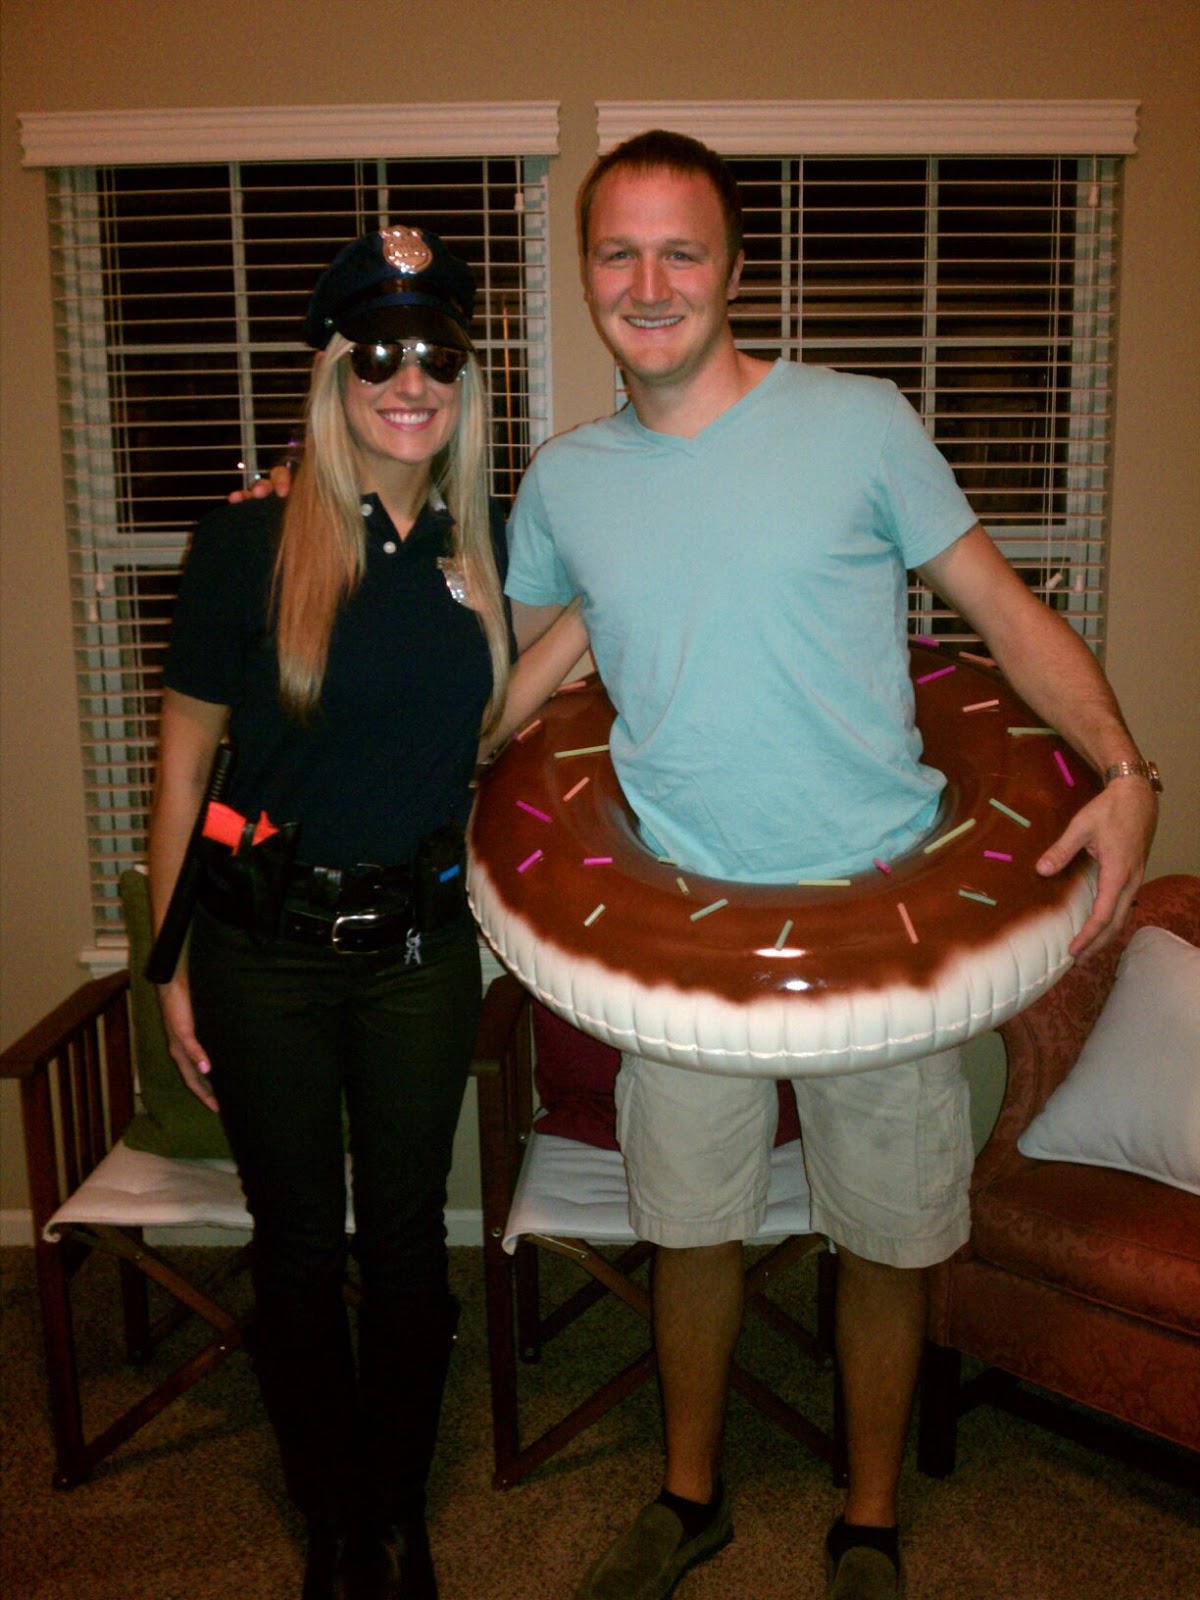 30 Best And Crazy Halloween Couple Costume Ideas Flawssy 4188